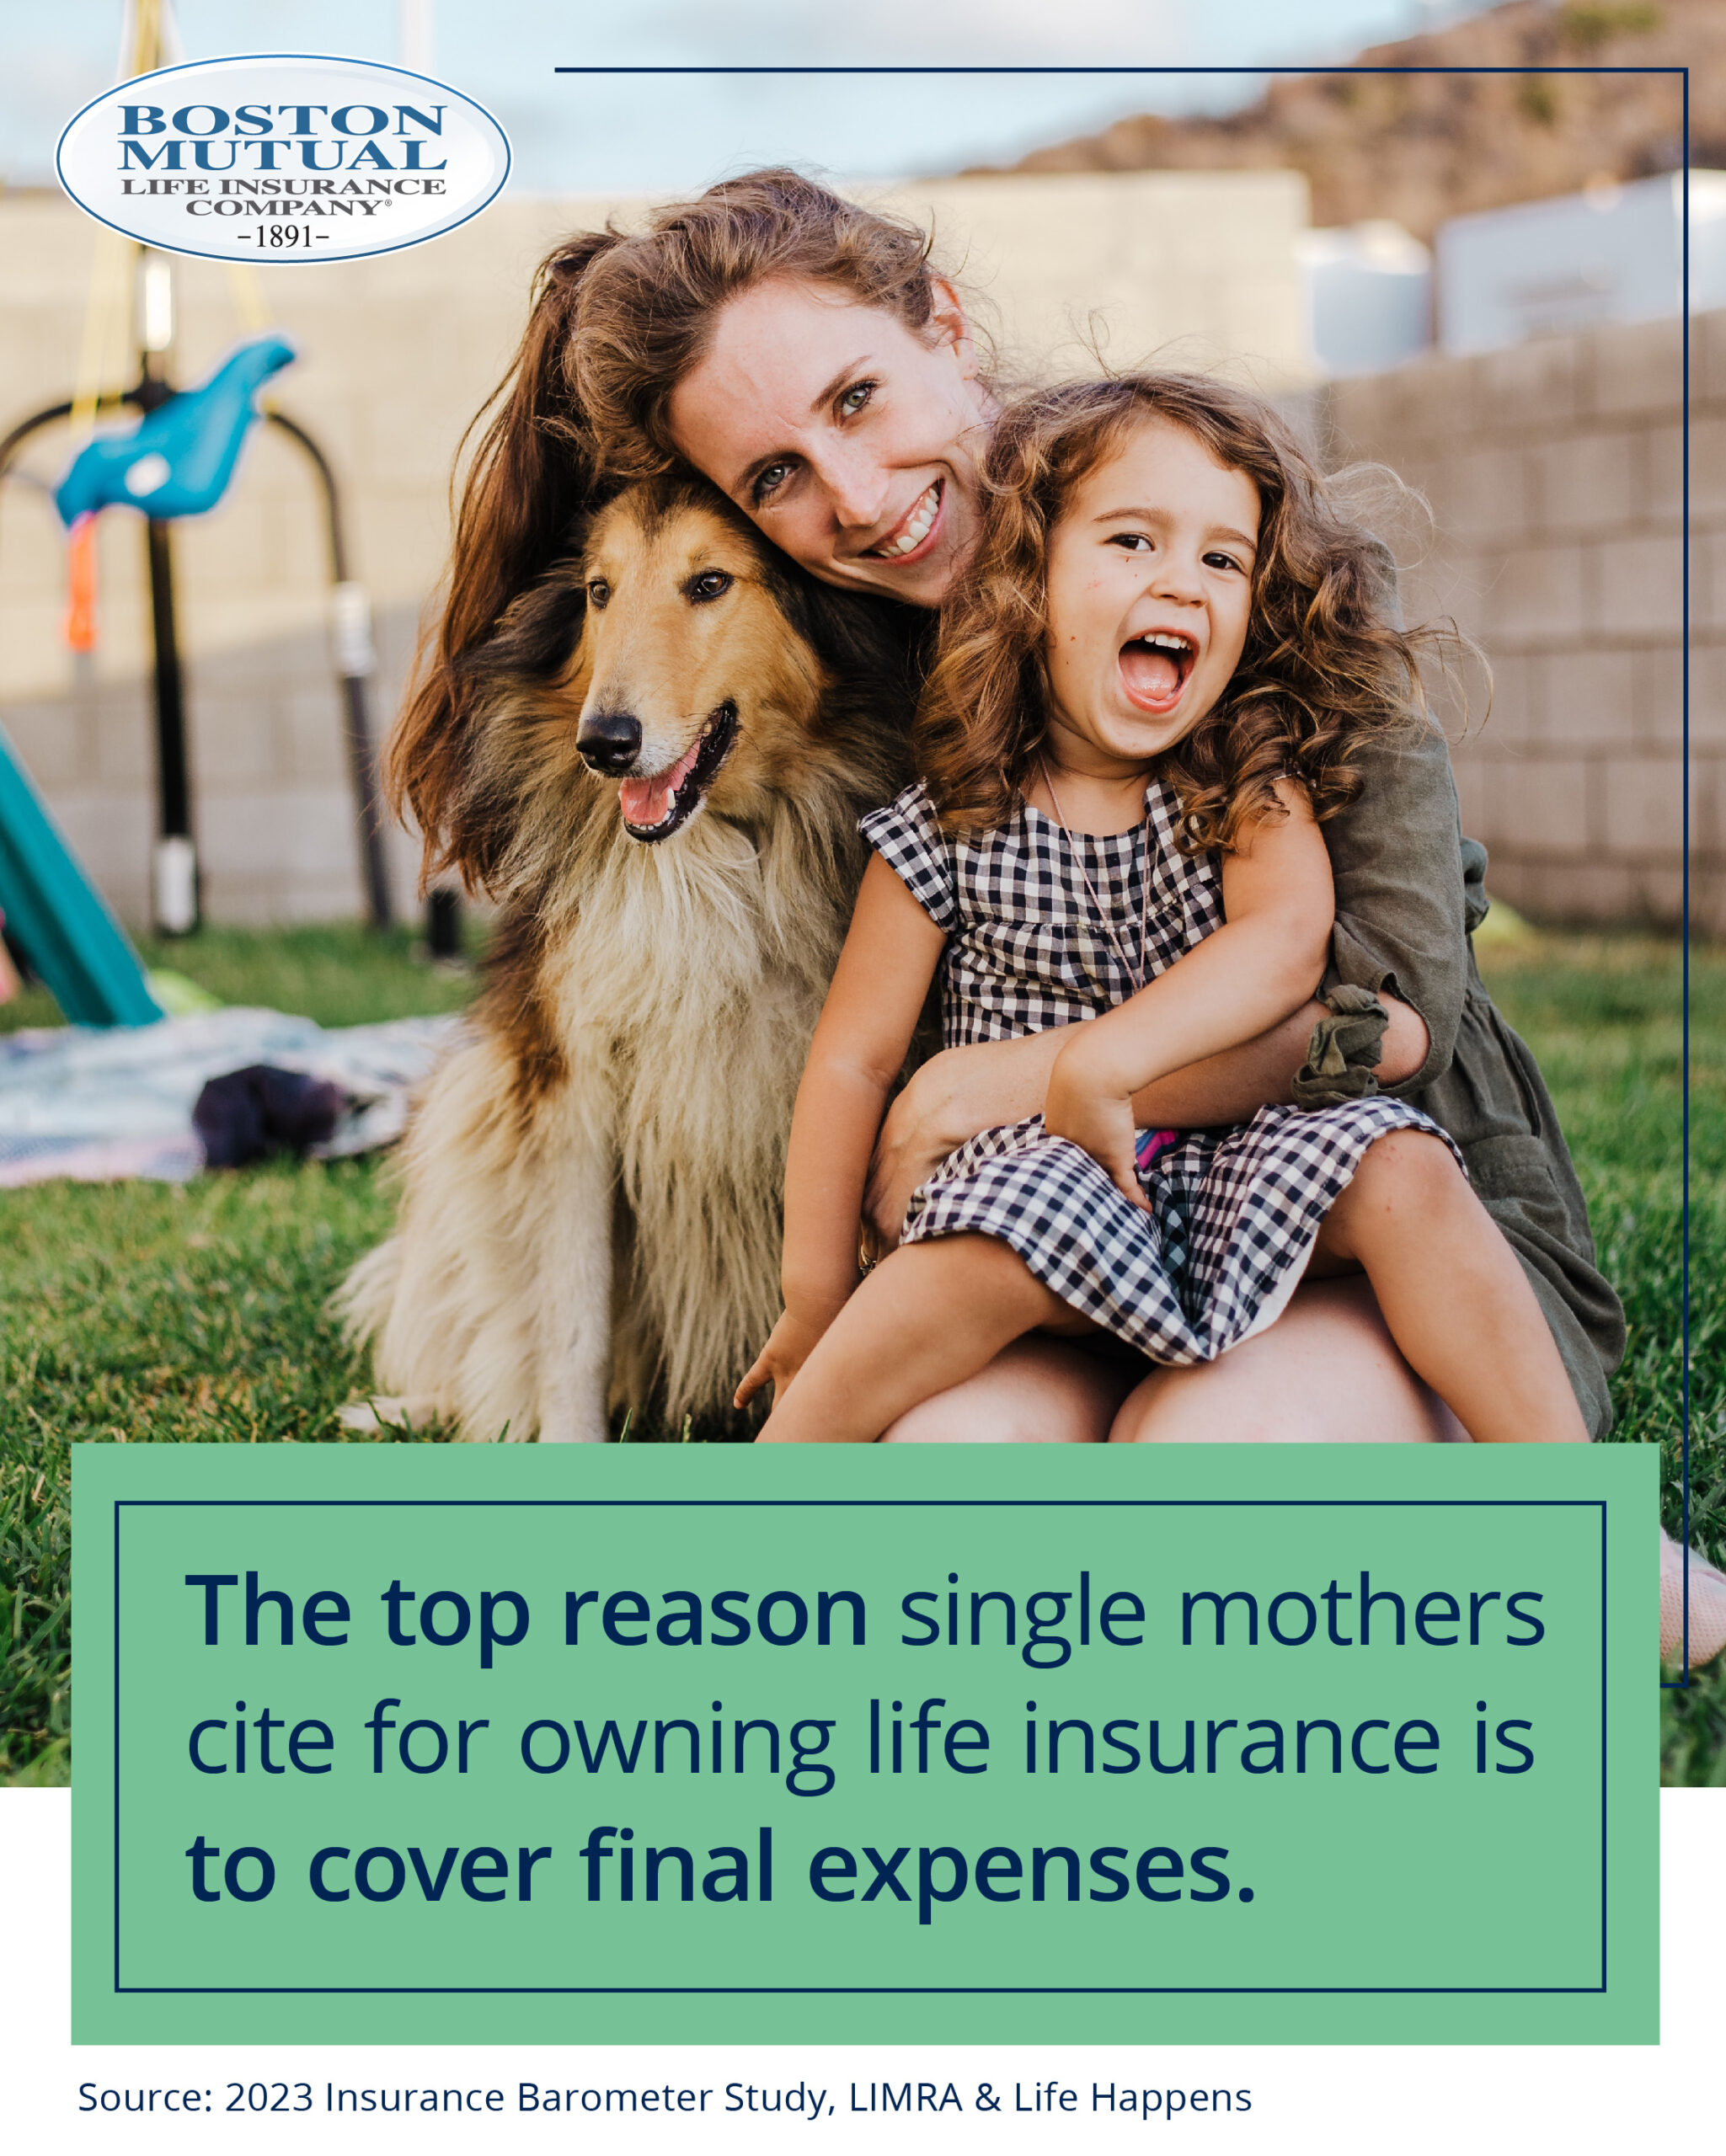 The Top Reason Single Mothers Cite For Owning Life Insurance Is To Cover Final Expenses